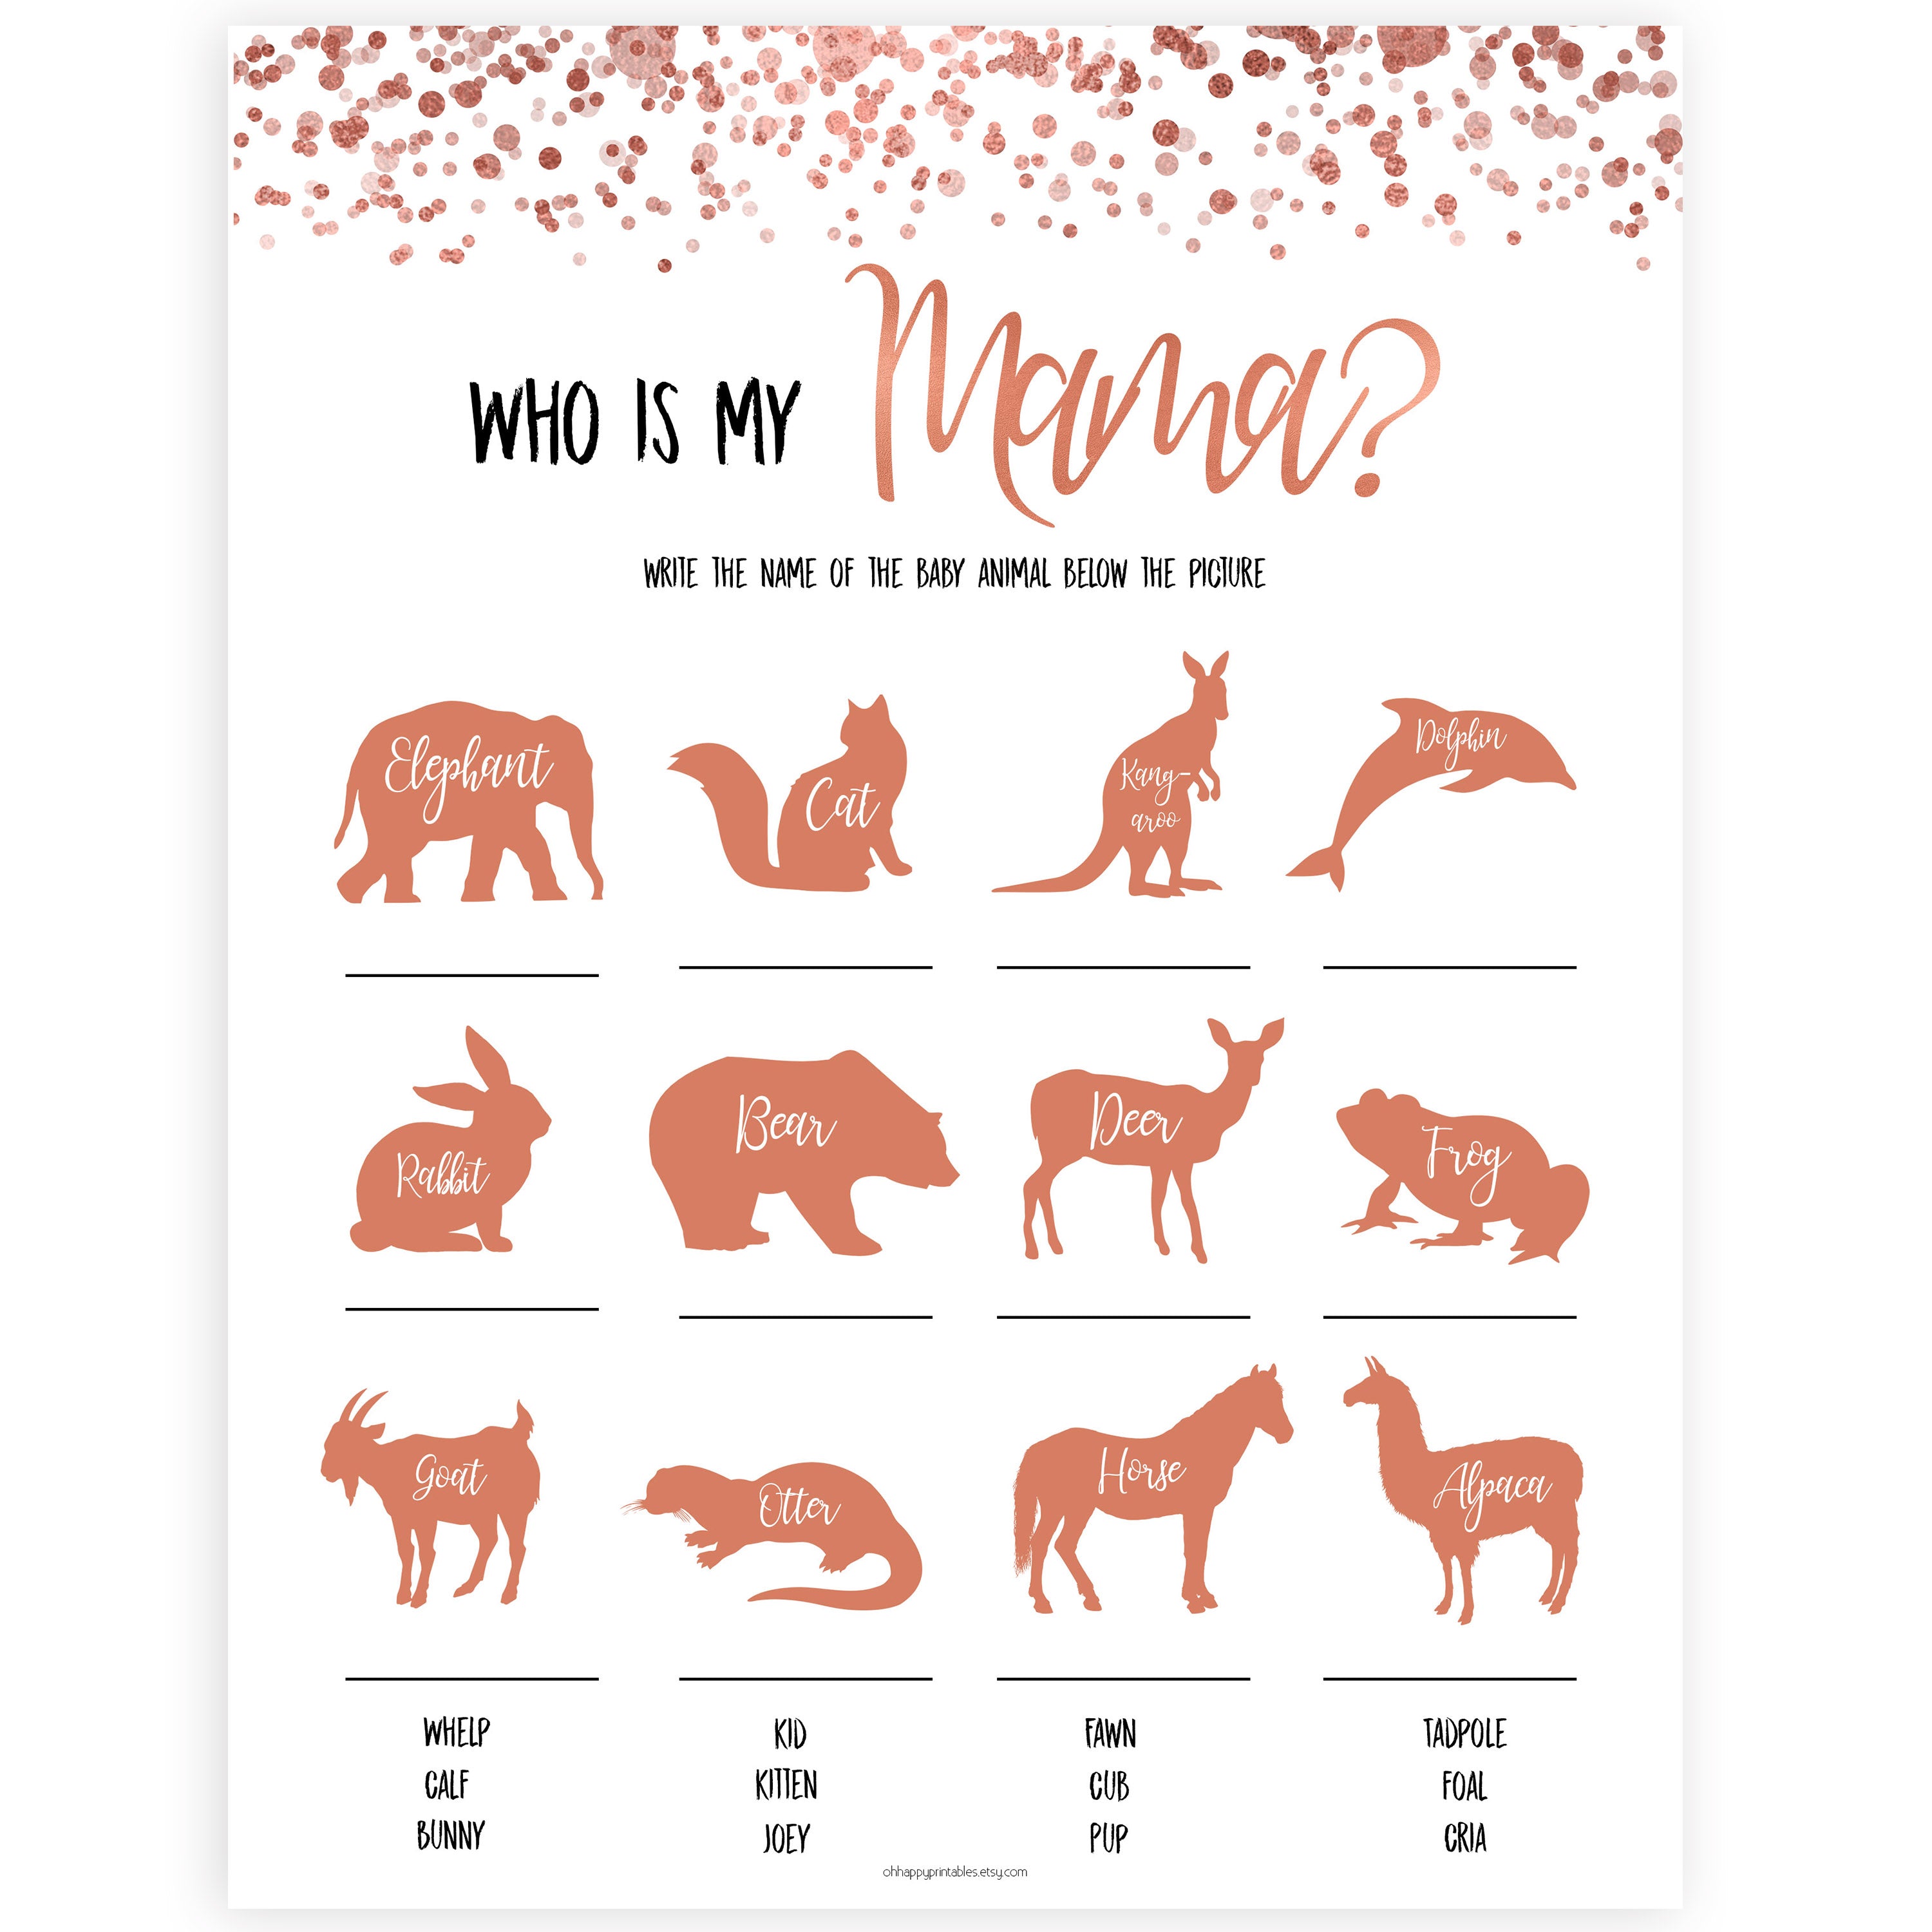 Rose Gold Who is My Mommy Animal Game, Who is my Mama Game, Baby Animal Game, Guess my Mama Game, Rose Gold Baby Shower Games, Mommy Game, printable baby shower games, fun baby shower games, popular baby shower games